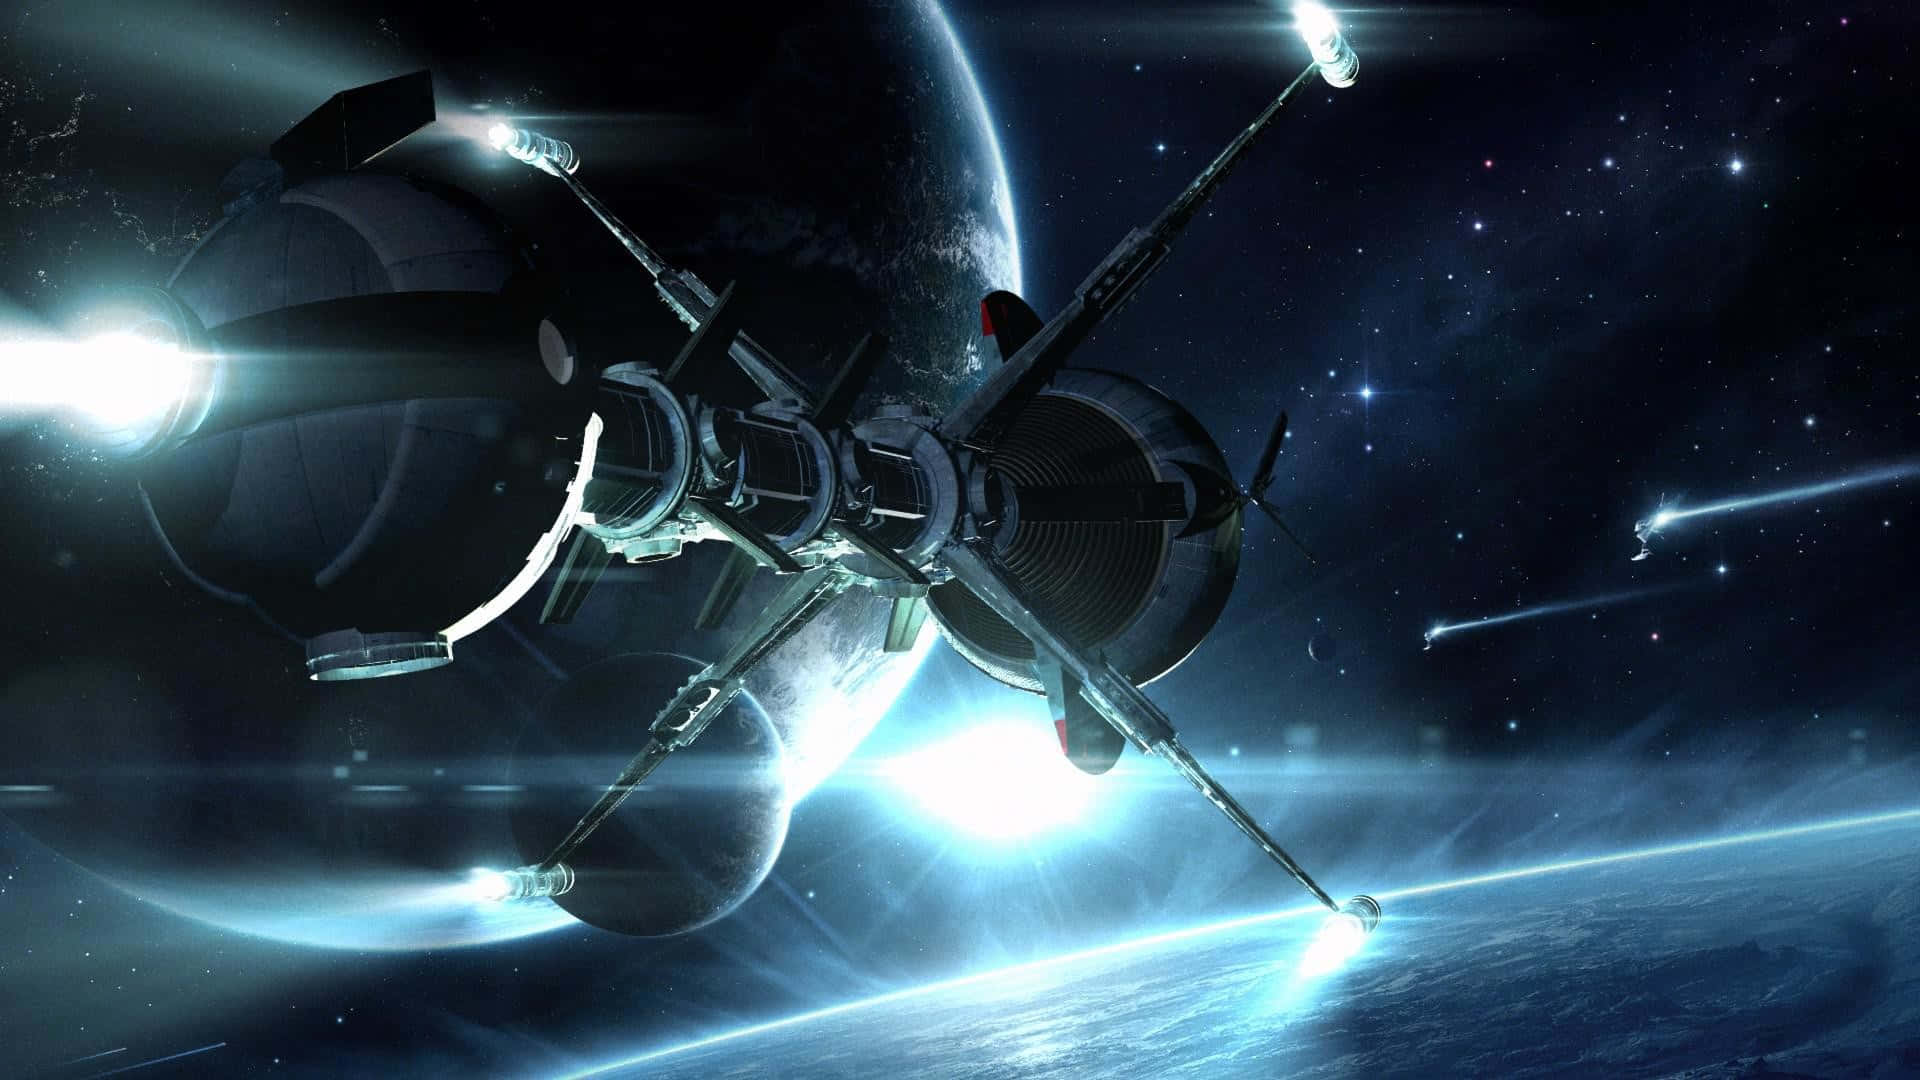 Exploring outer space in futuristic spaceship